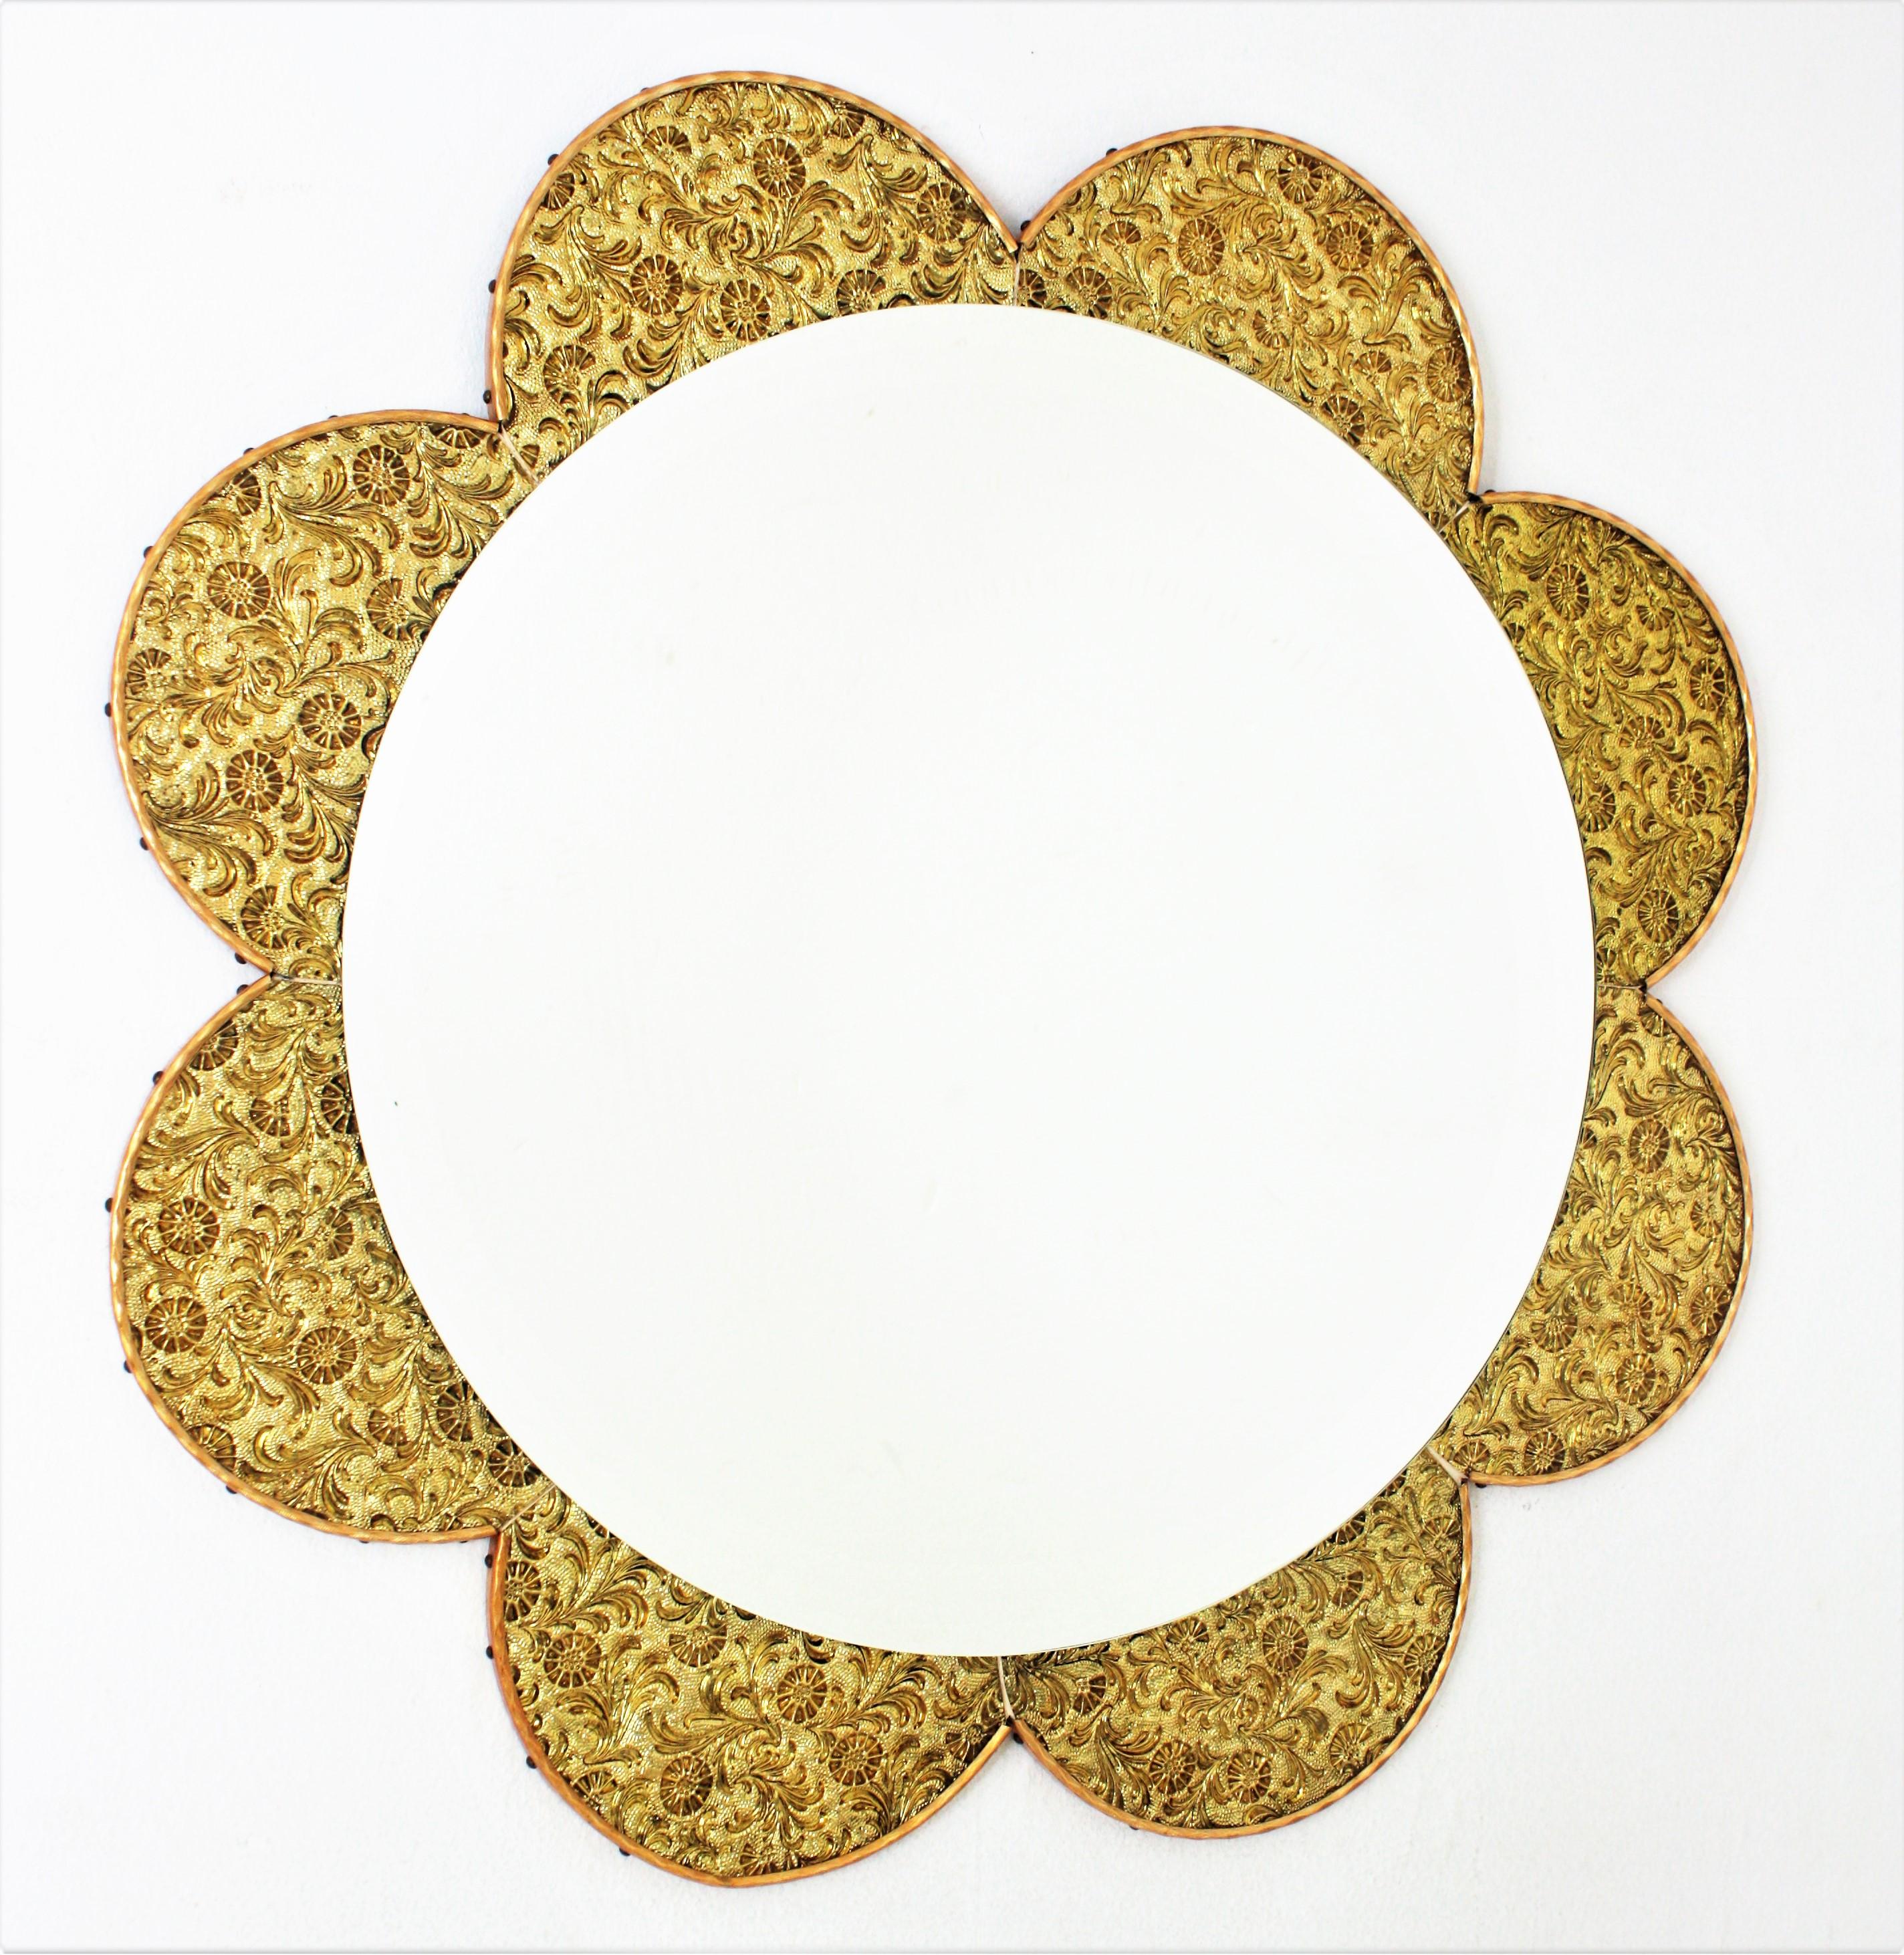 Sunburst mirror with the shape of a Daisy flower, Golden glass Frame, 1960s-1970s.
Eye-catching flower burst mirror with petals frame made with pieces of iridescent golden glasses. The mirrored golden petals have a heavily adorned design with